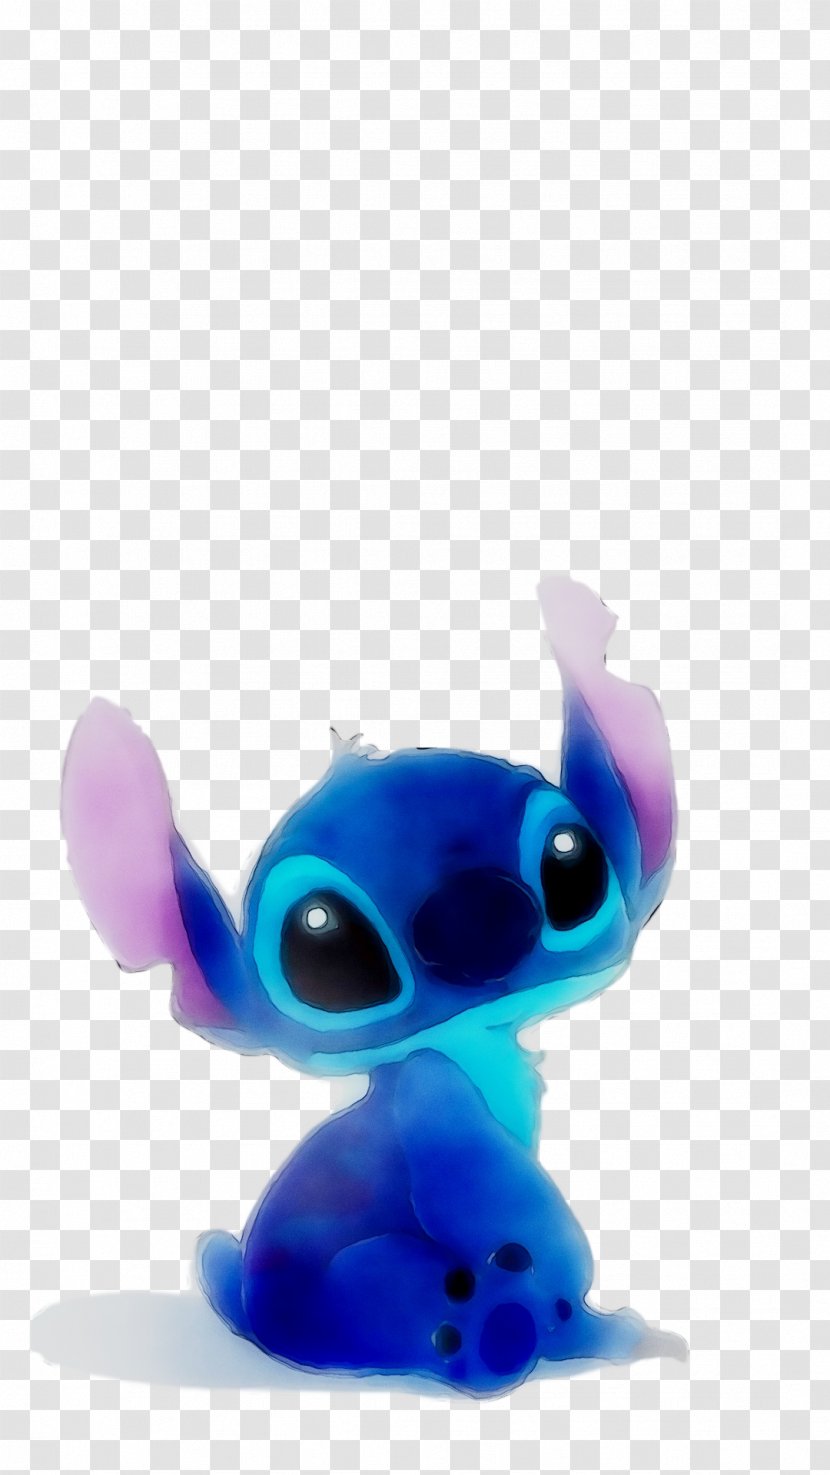 Figurine Stuffed Animals & Cuddly Toys Organism - Fictional Character - Cobalt Blue Transparent PNG